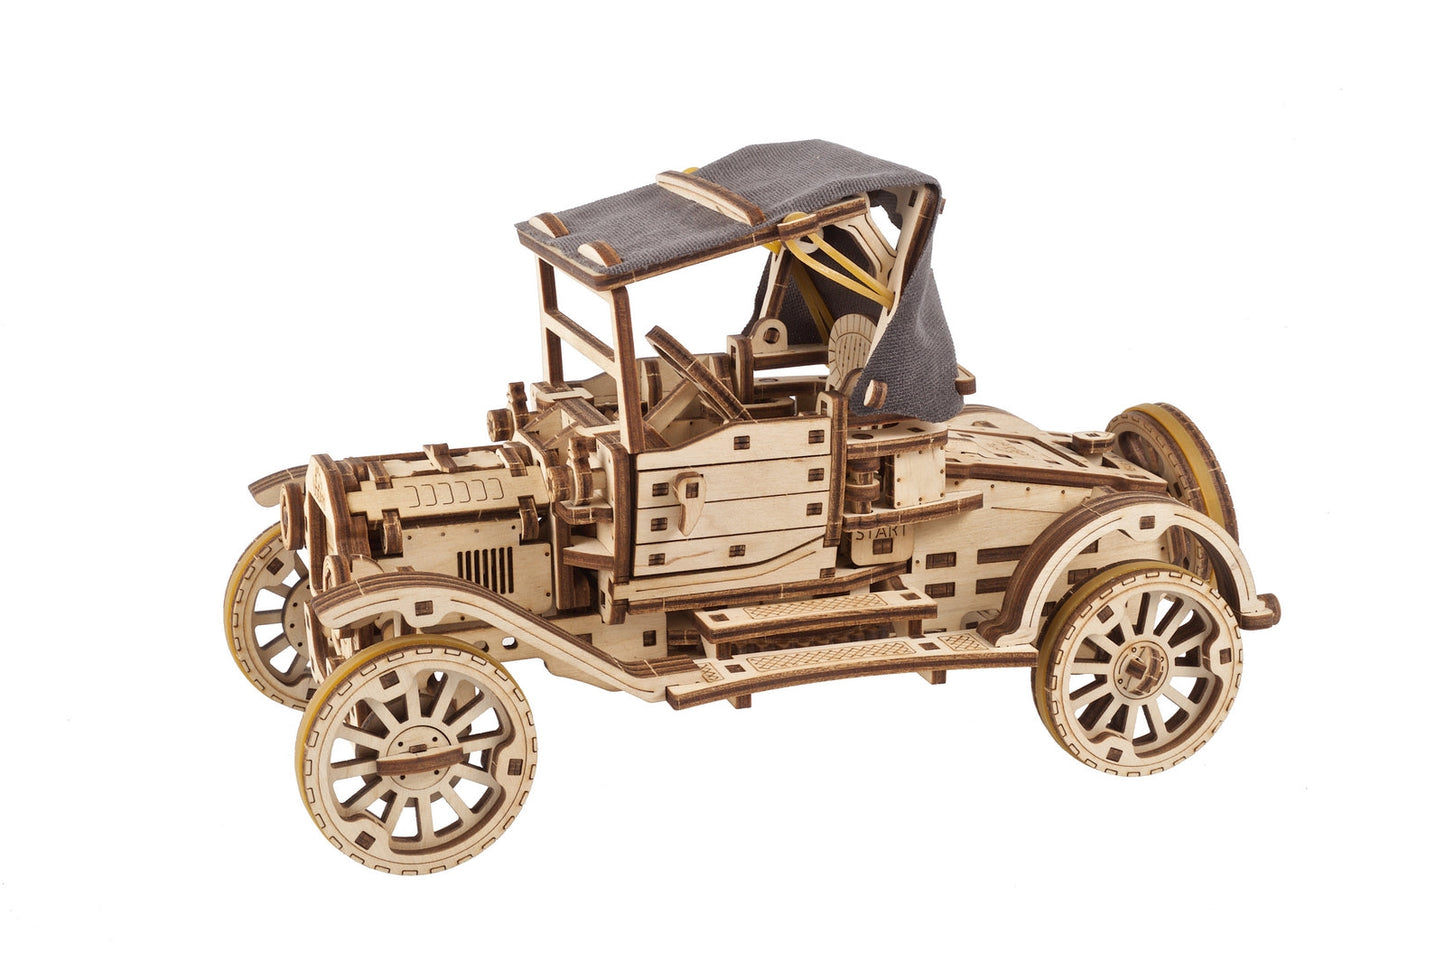 Ugears Retro Car UGT-T ★Mechanical 3D Puzzle Kit Model Toys Gift Present Birthday Xmas Christmas Kids Adults